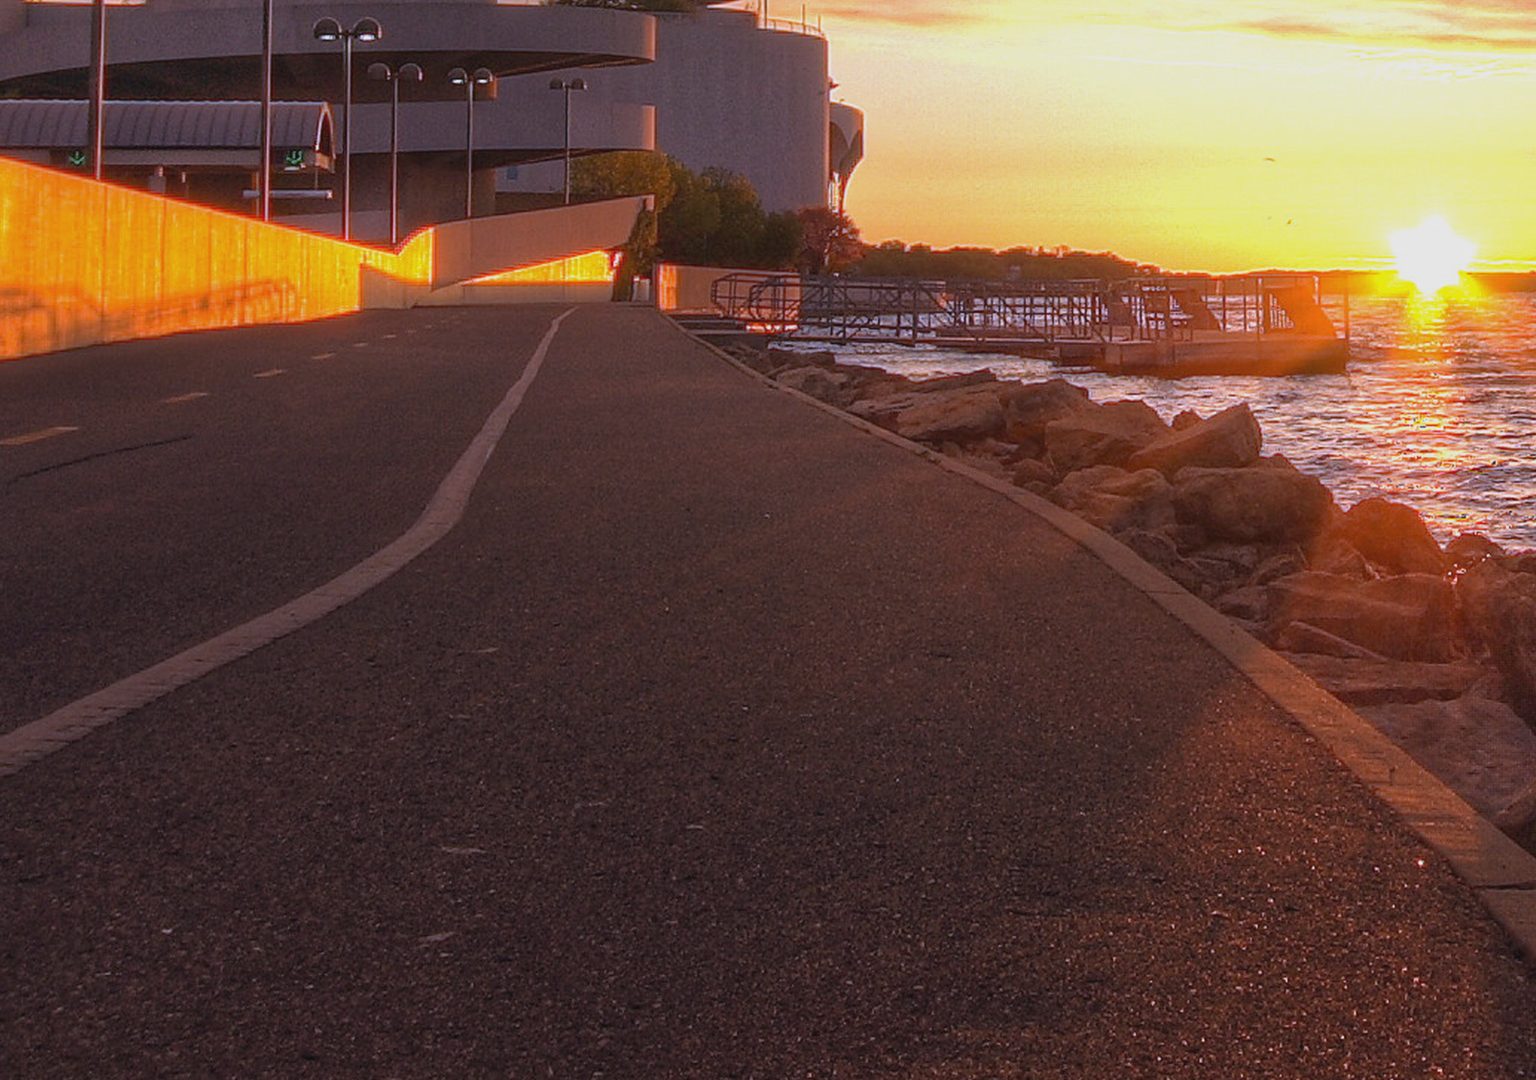 Paved bike path on lakeshore in the foreground with sun rising over horizon in the distance